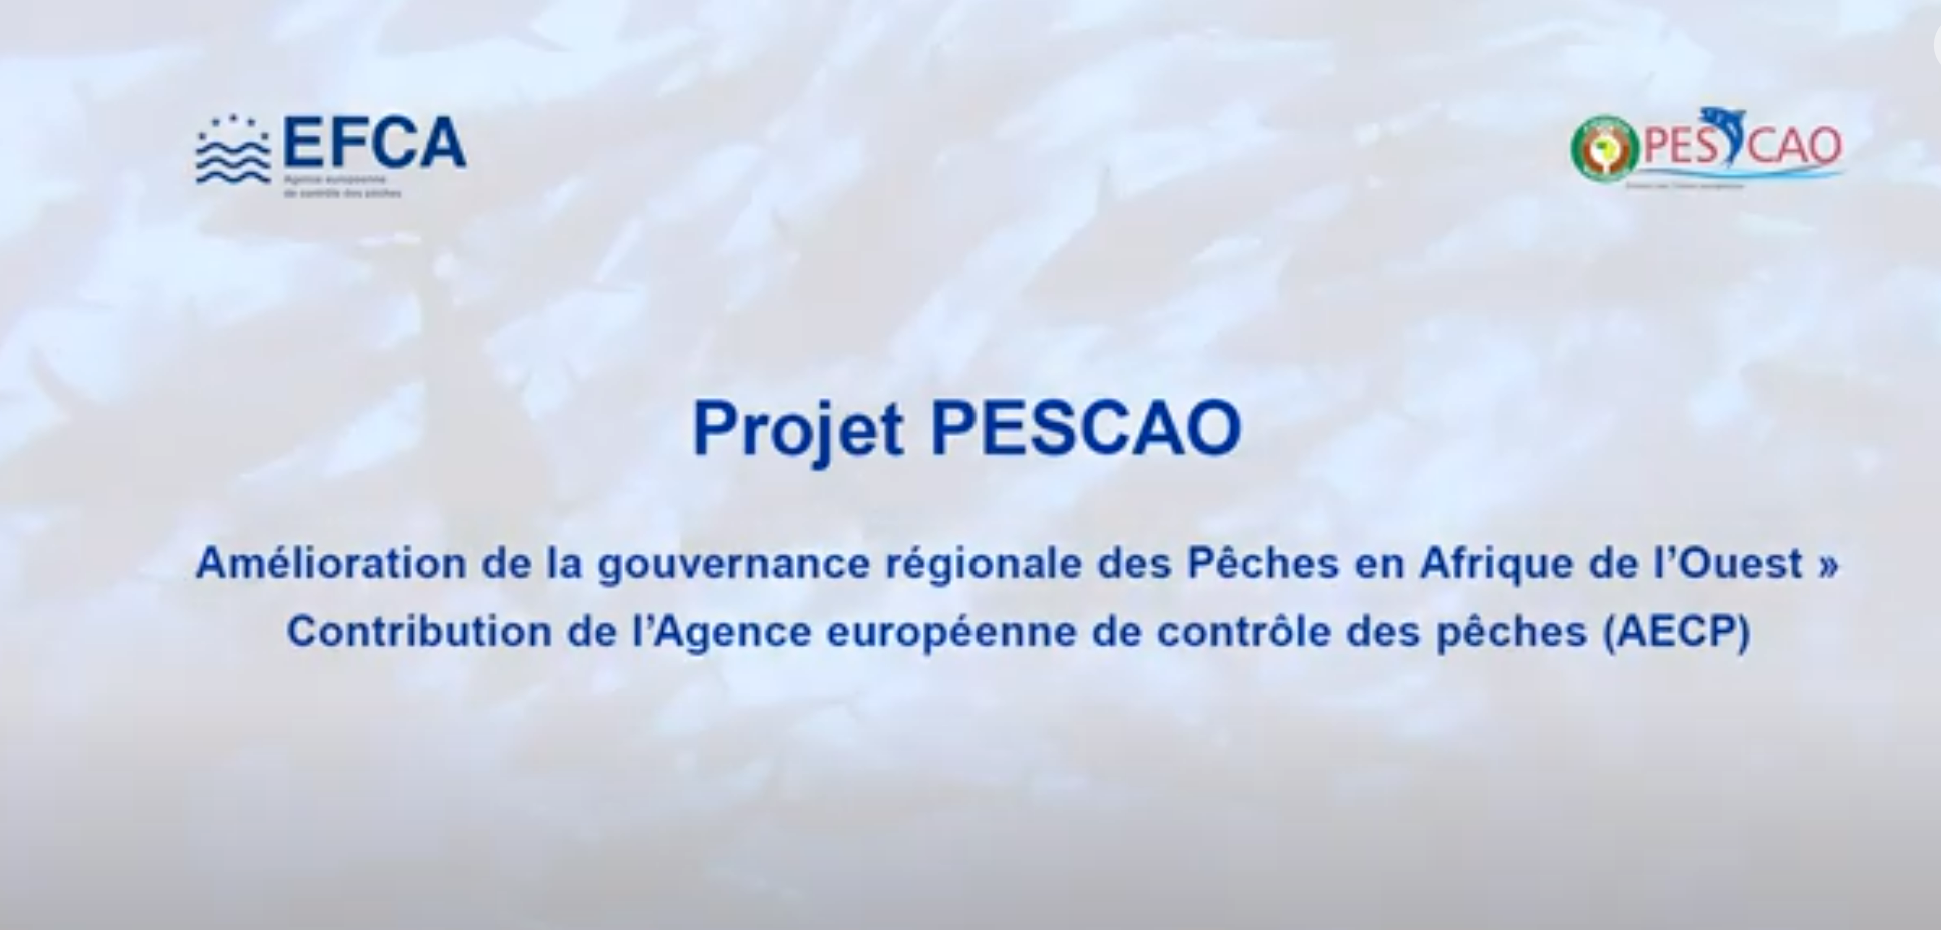 Improved regional fisheries governance in western Africa (PESCAO)